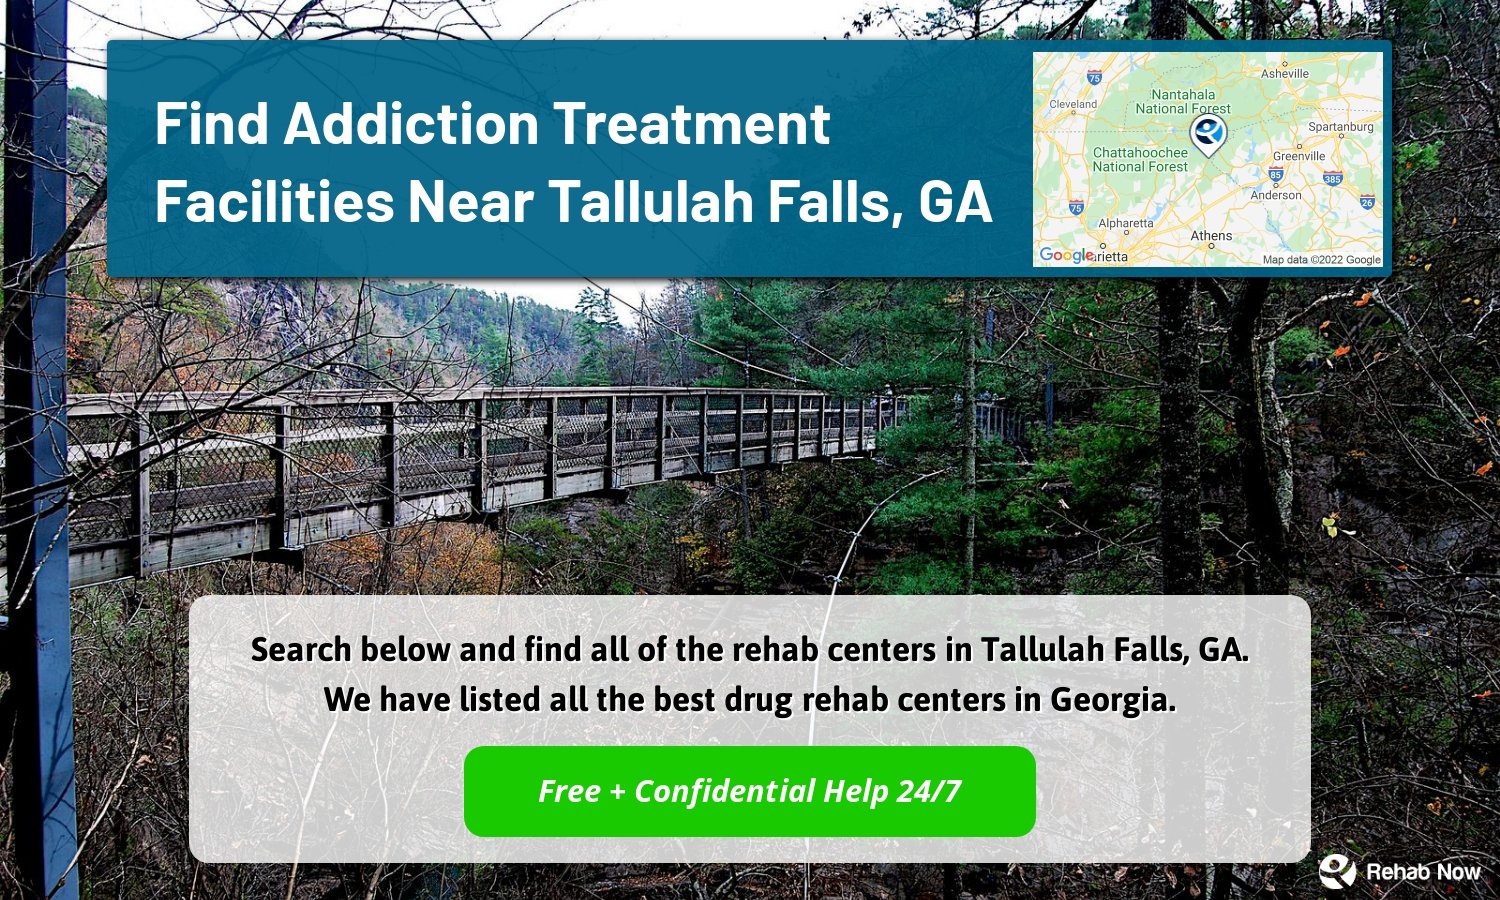 Search below and find all of the rehab centers in Tallulah Falls, GA. We have listed all the best drug rehab centers in Georgia.